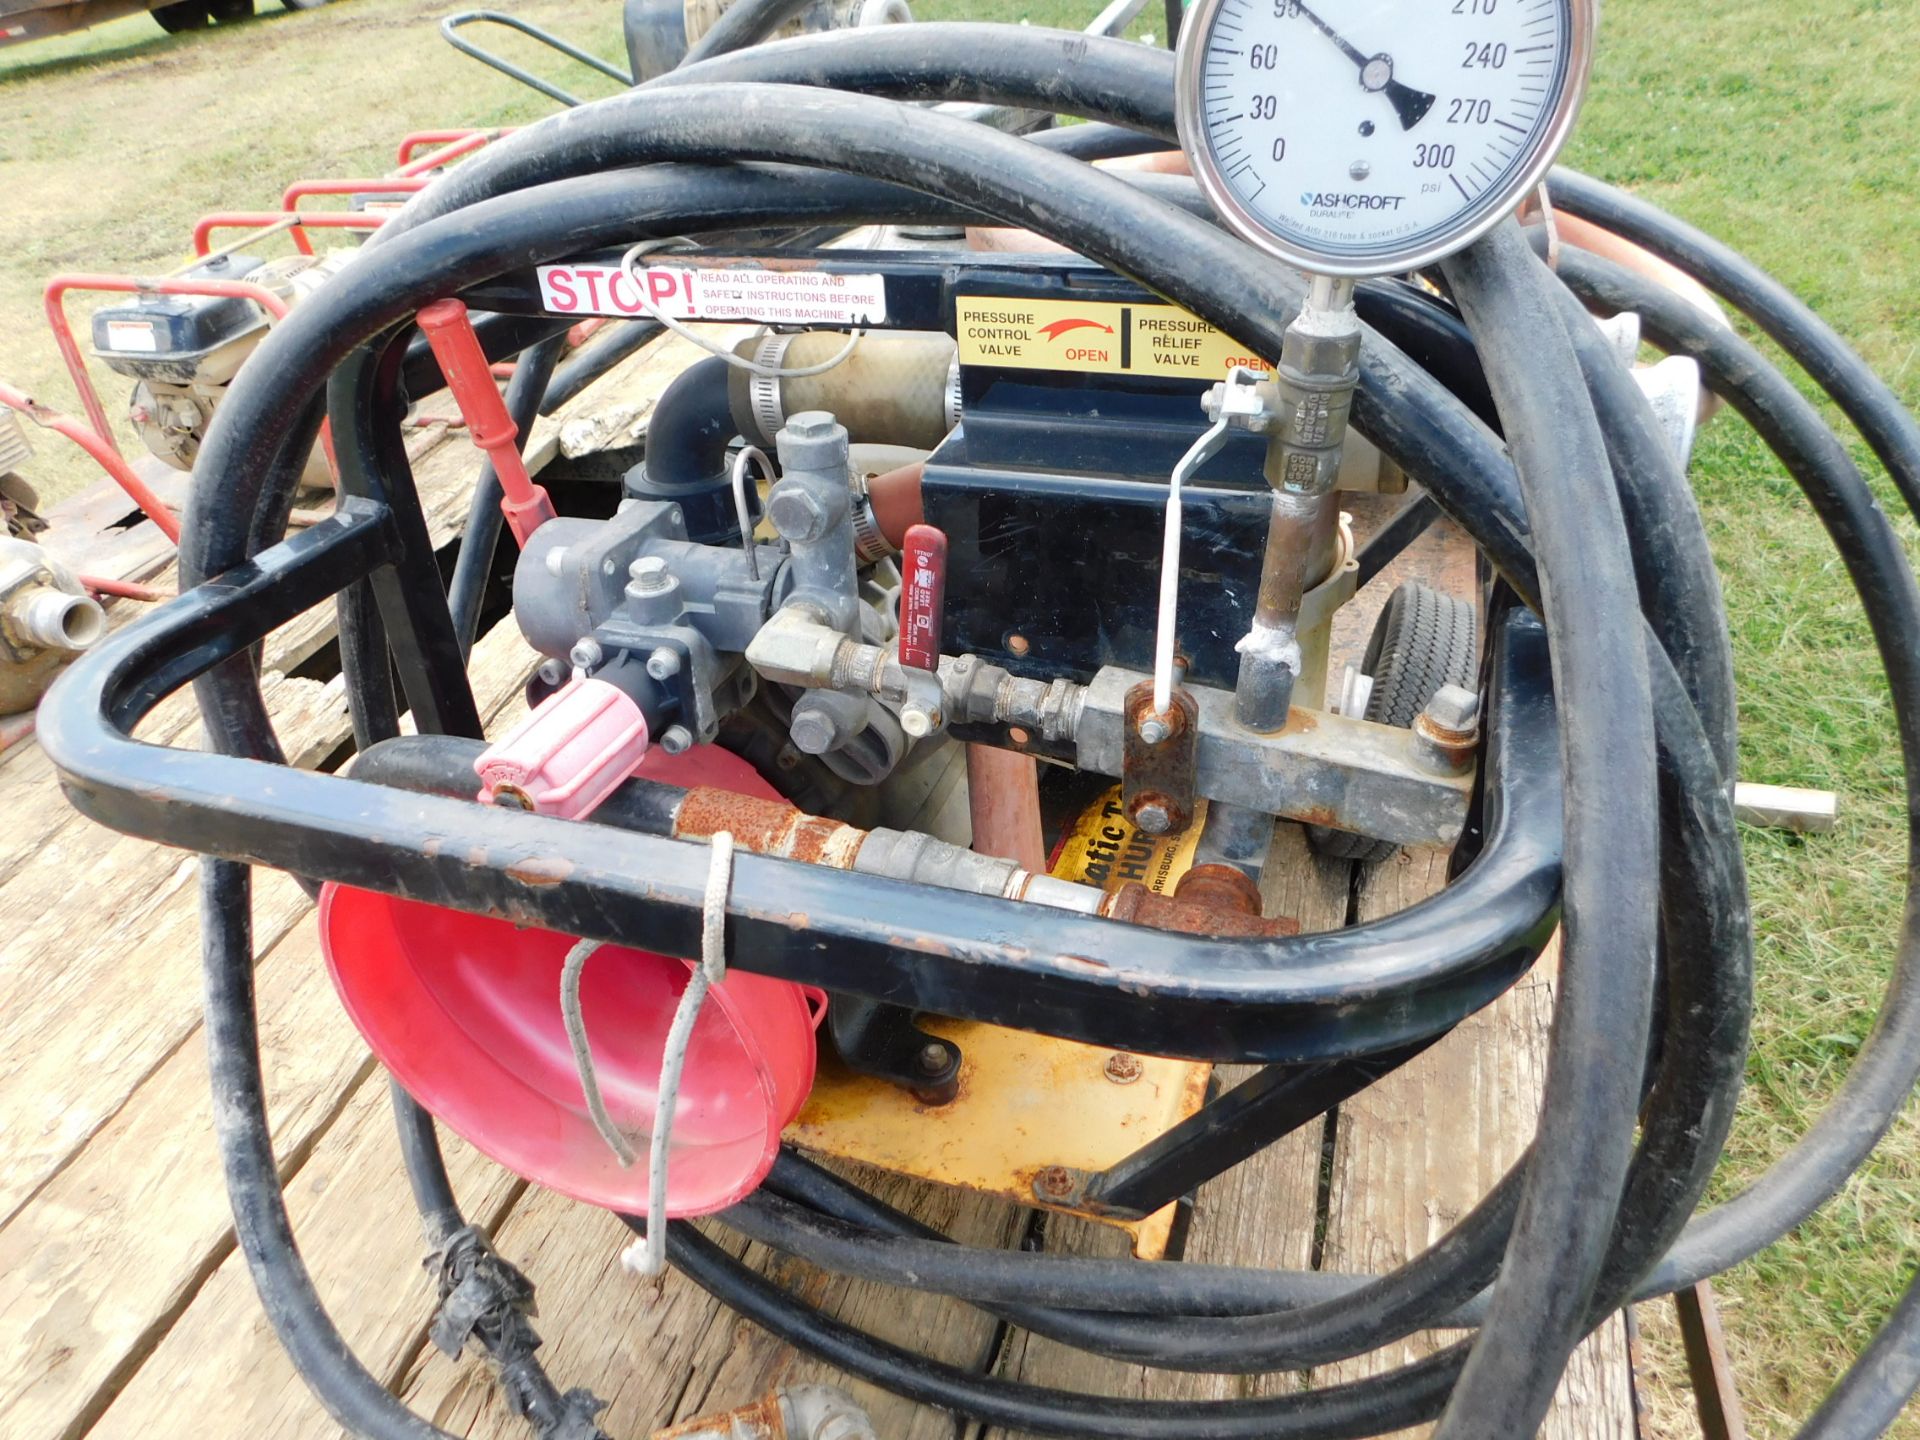 Hurco Model HTP-23-700H Gas-Powered Hydrostatic Test Pump with Honda GX 390 Engine - Image 2 of 7